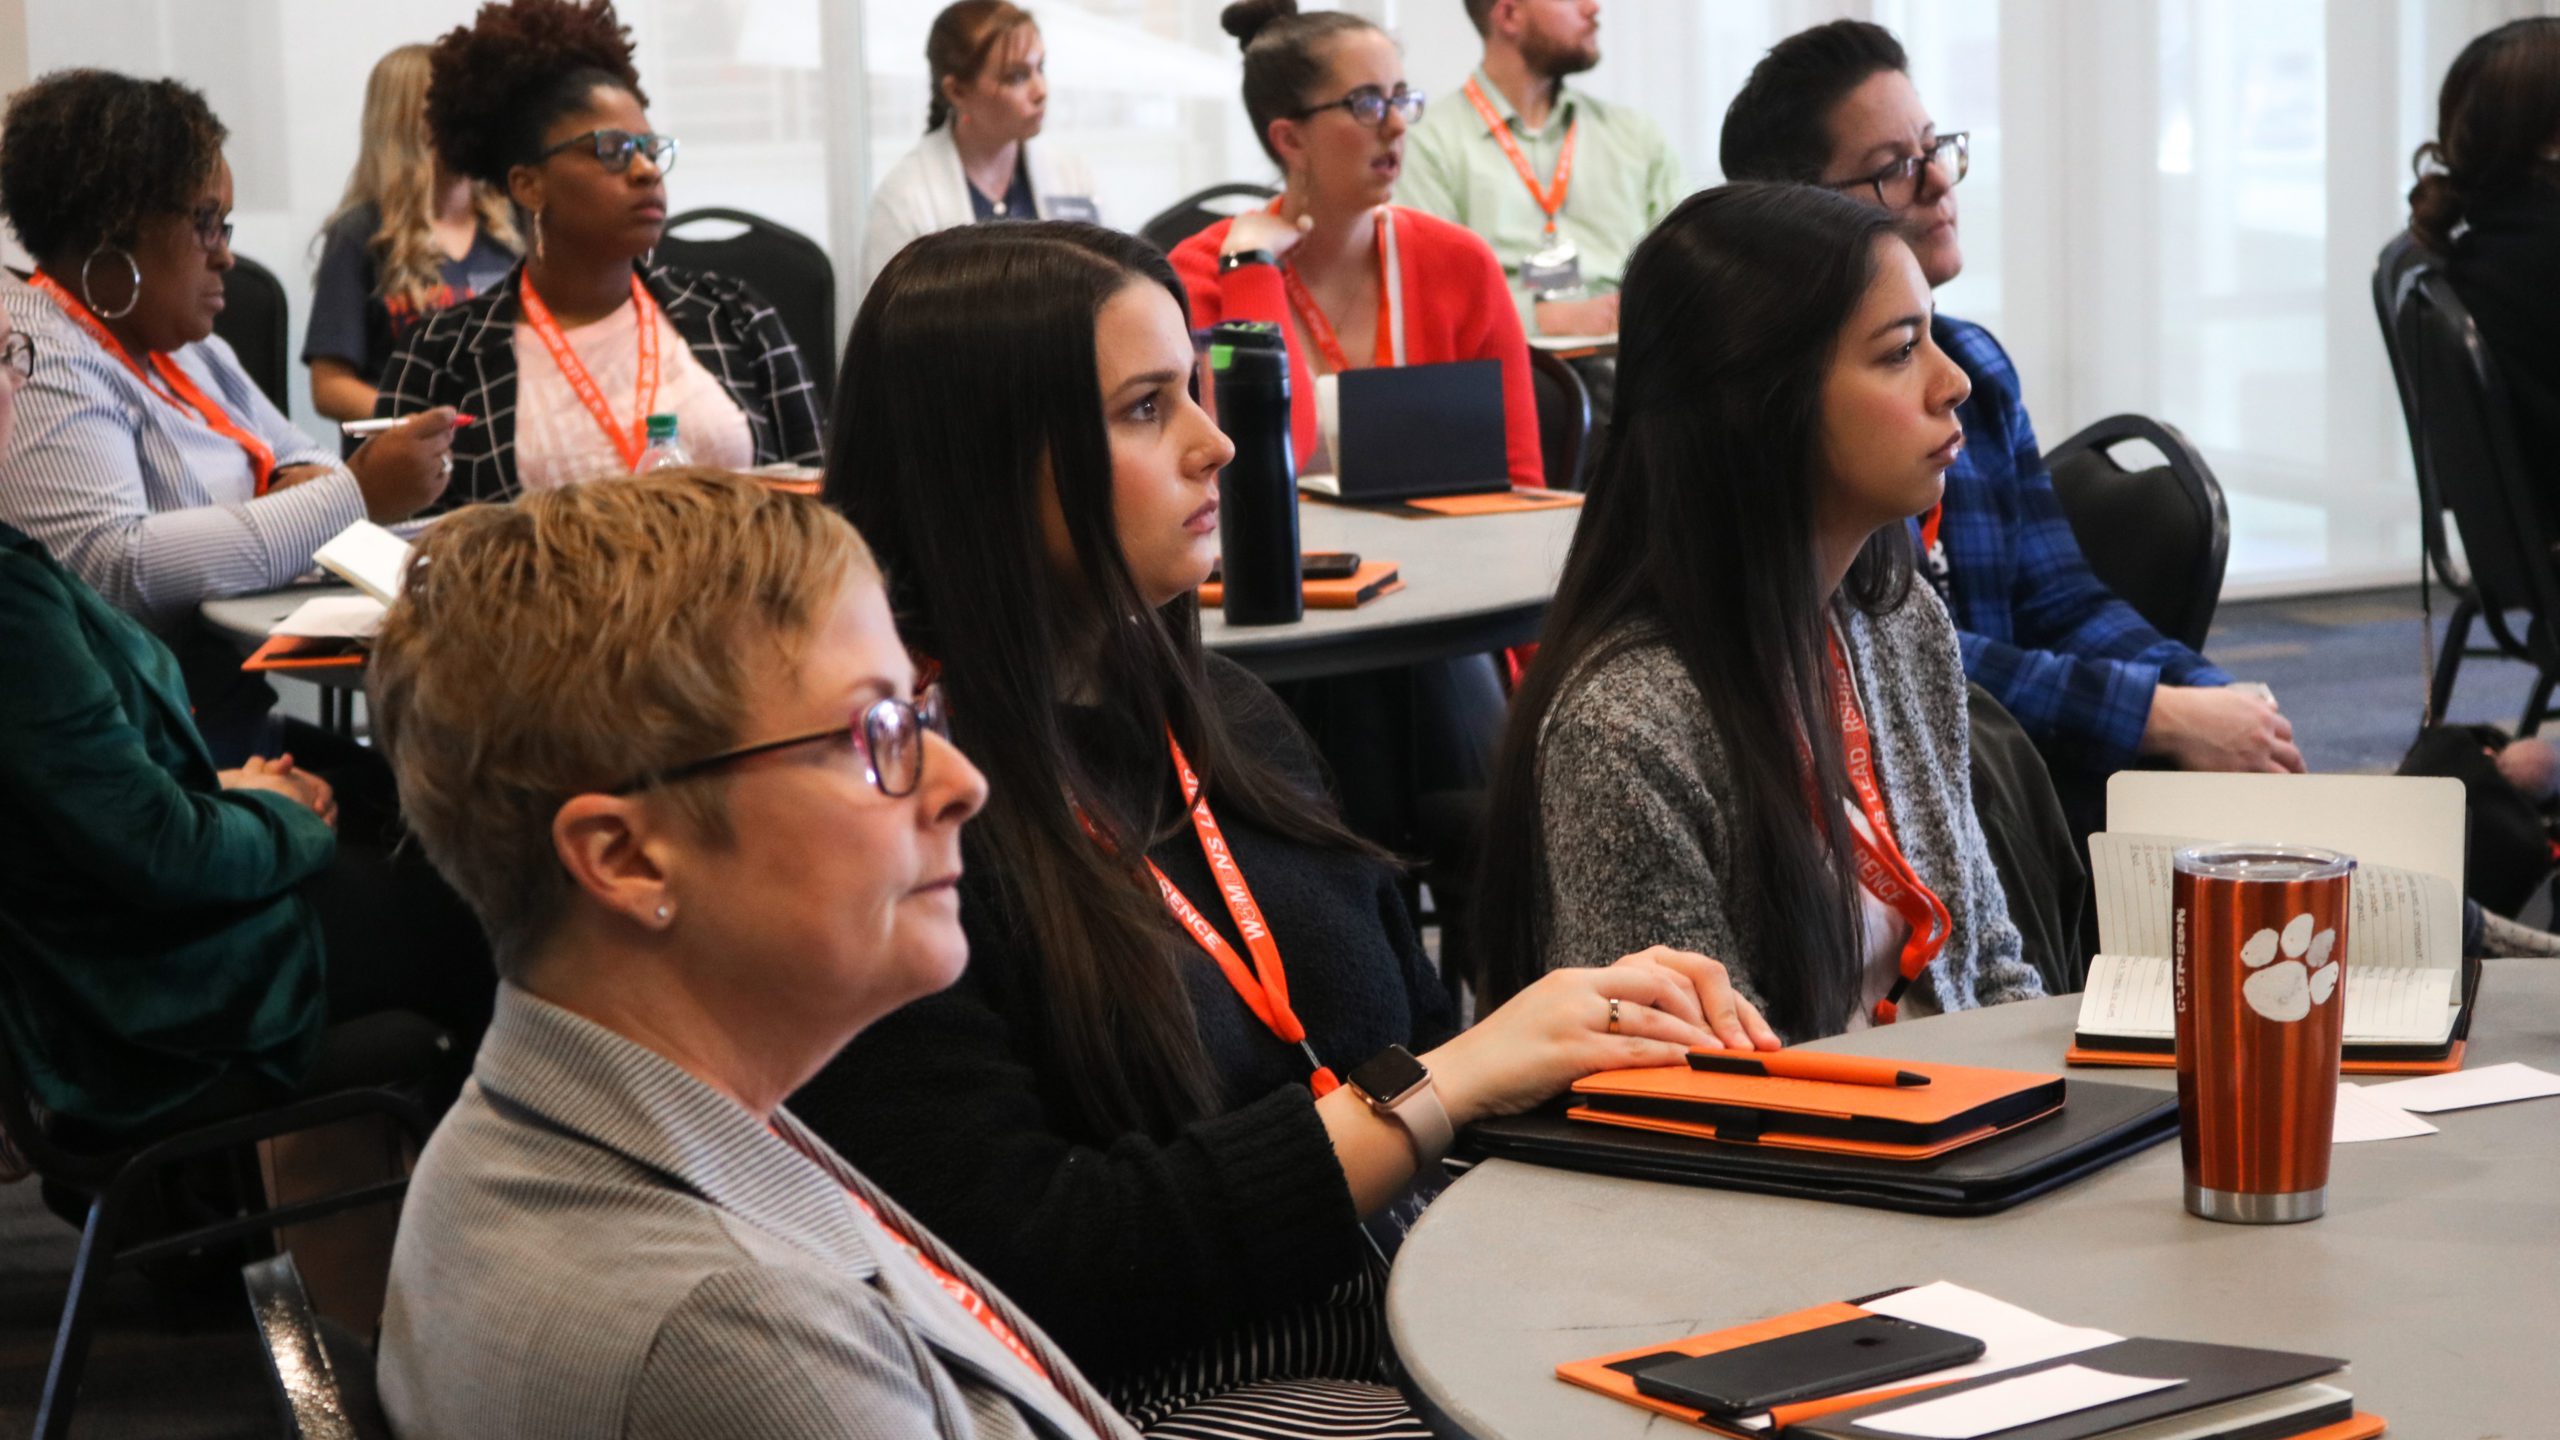 Attendees pay close attention to guest speakers during the 2020 Women in Leadership Conference in Hendrix Student Center